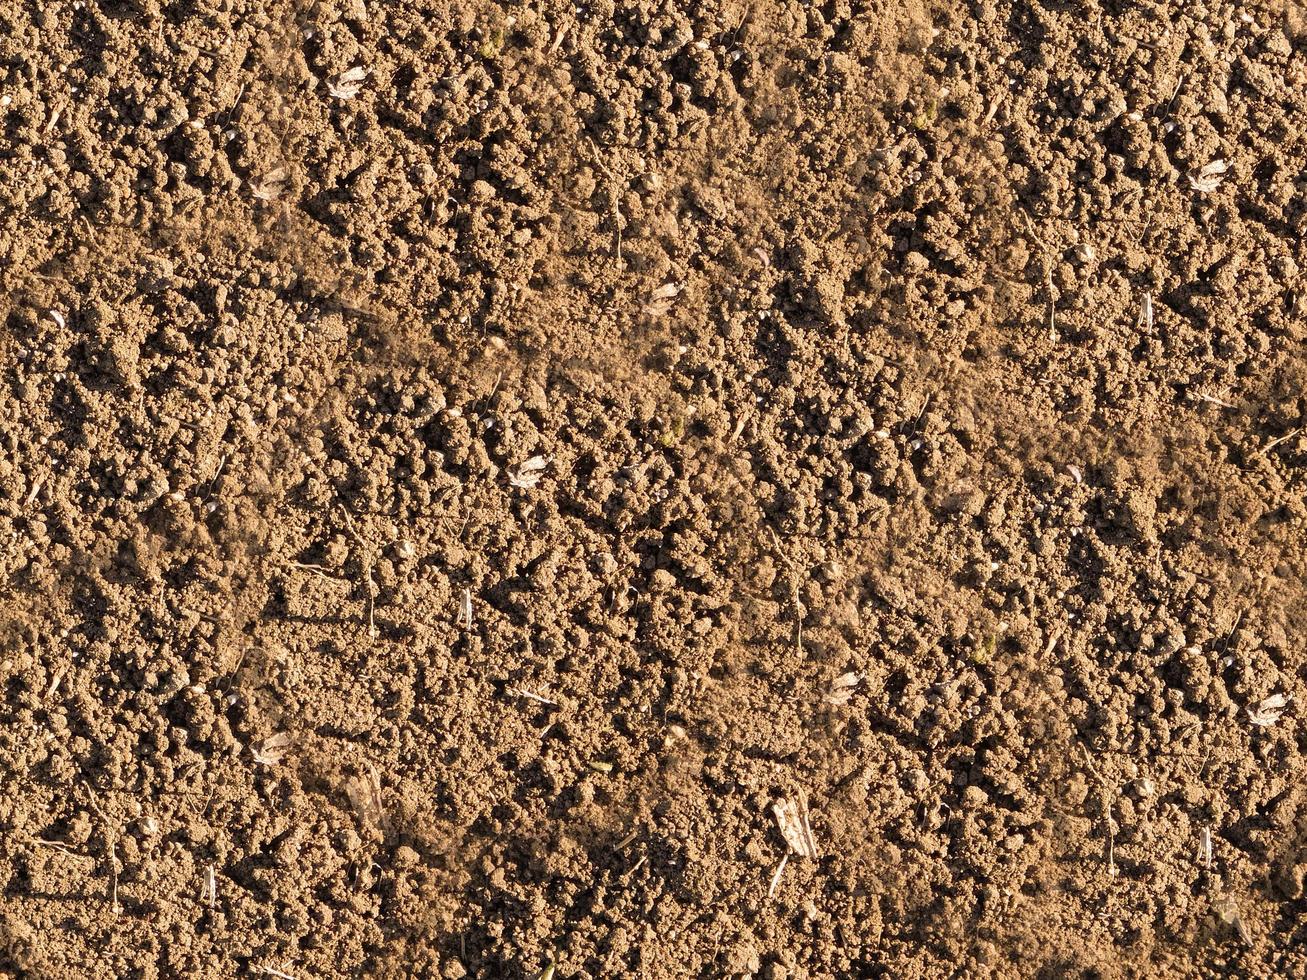 Patch of dry and cracked soil for background or texture photo